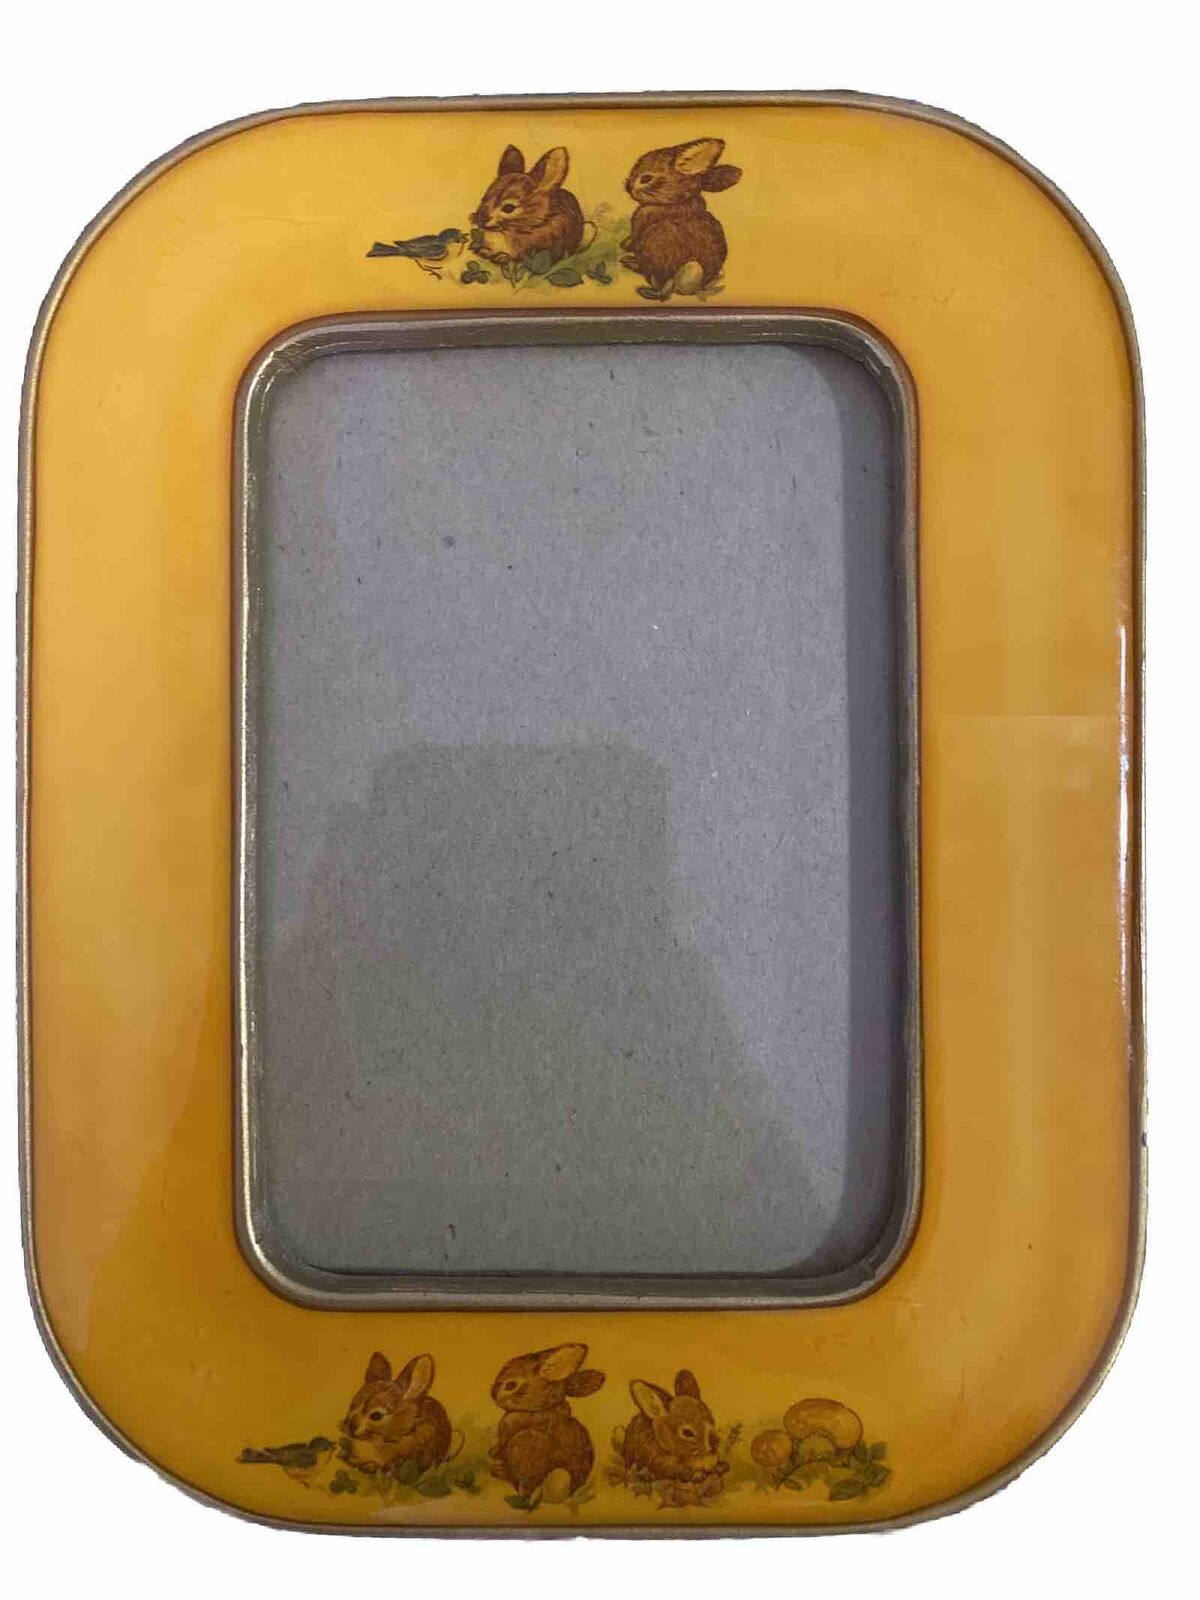 The Bucklers Inc 3x5 Vintage Rabbit Picture Frame No. 3